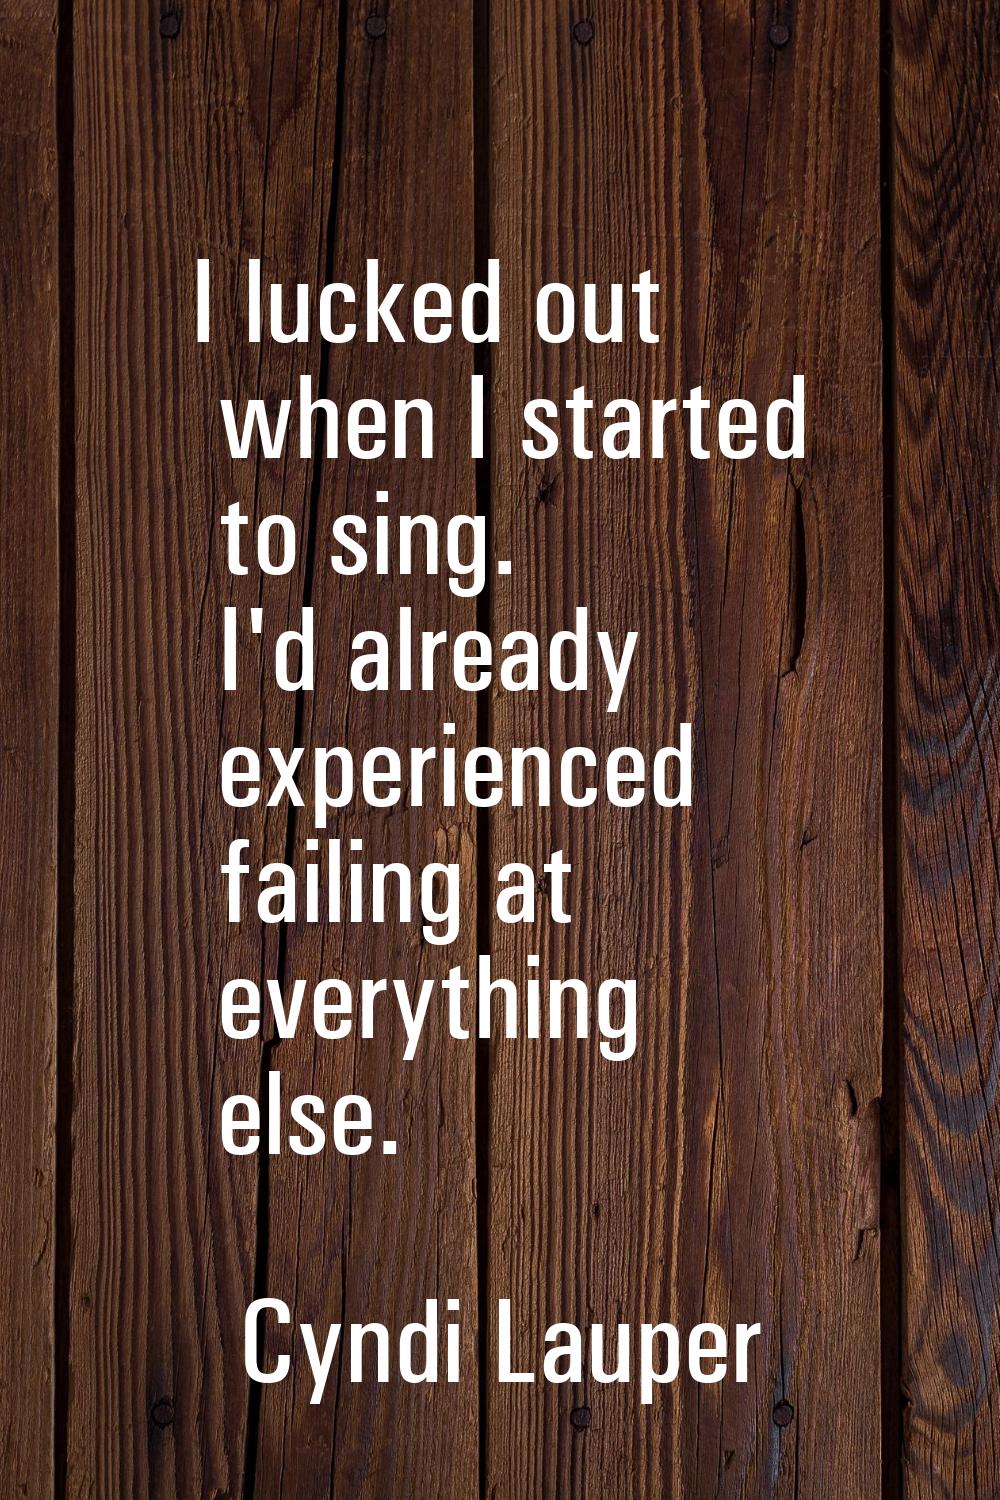 I lucked out when I started to sing. I'd already experienced failing at everything else.